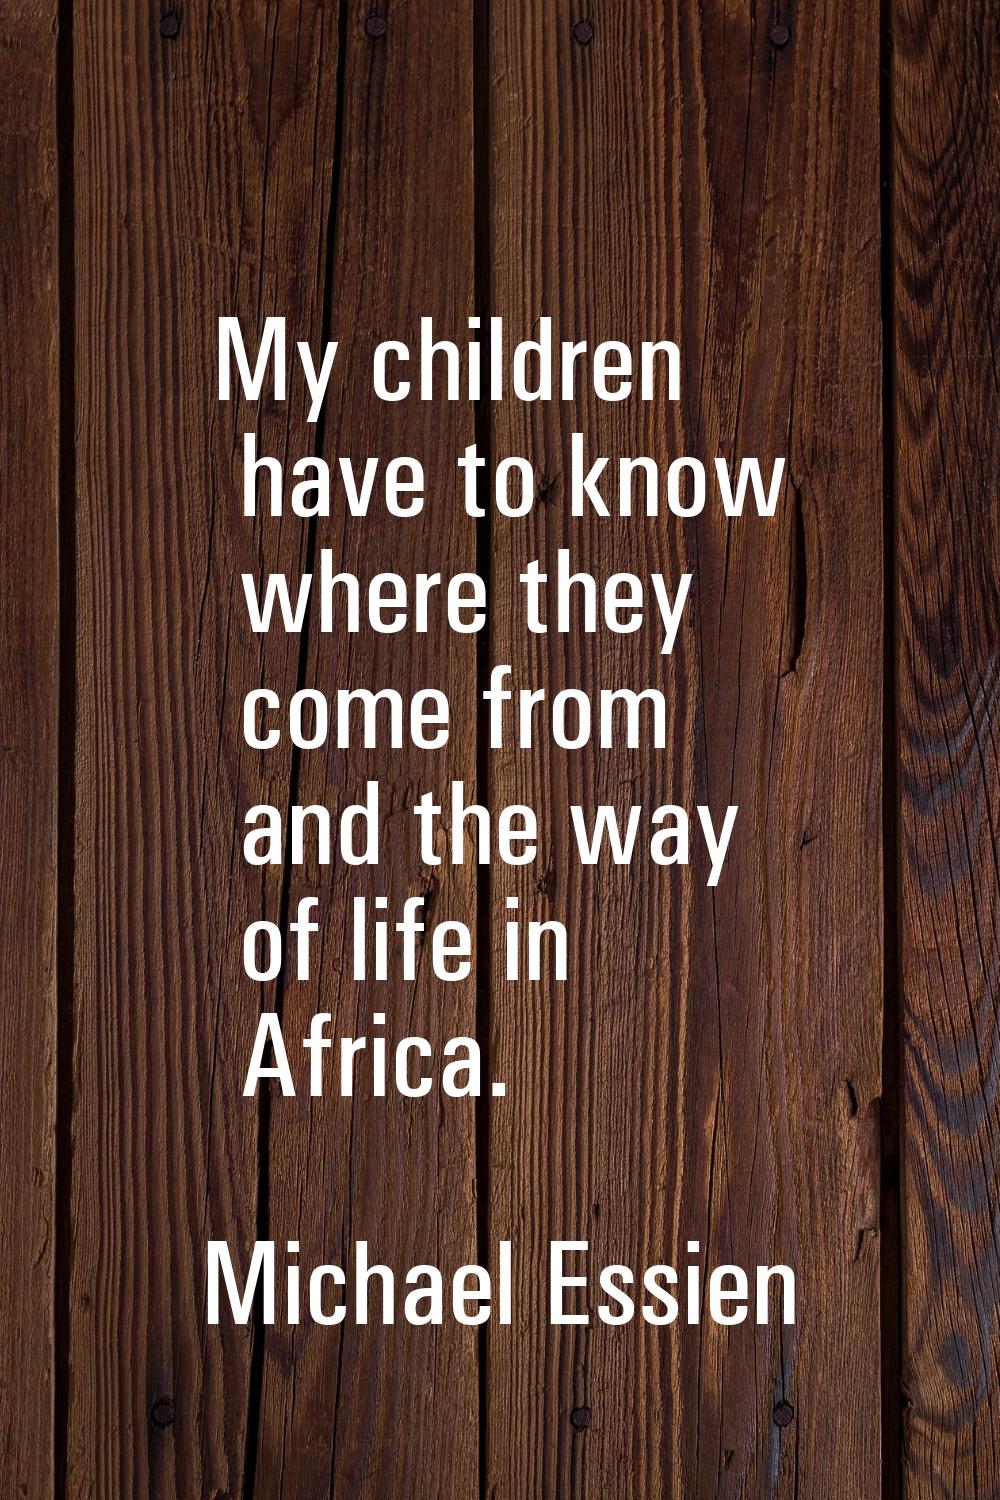 My children have to know where they come from and the way of life in Africa.